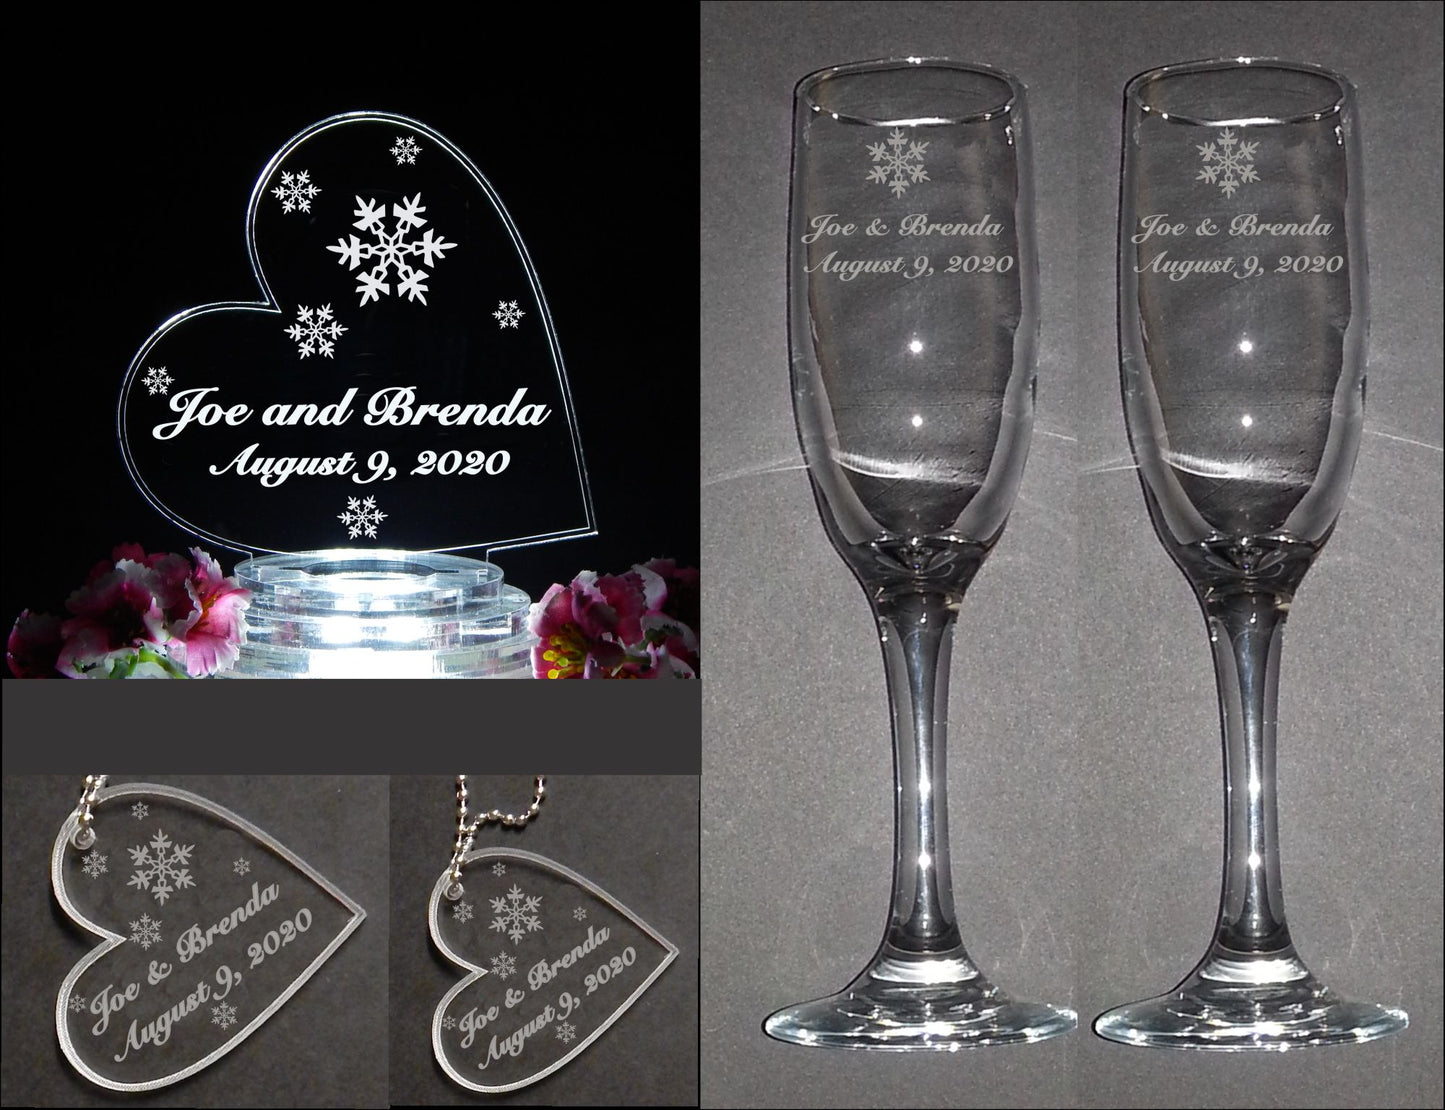 photos showing a side heart shaped acrylic cake topper decorated with snowflakes, two sizes of matching heart shaped keychains, and a set of champagne flutes engraved with snowflake names and date